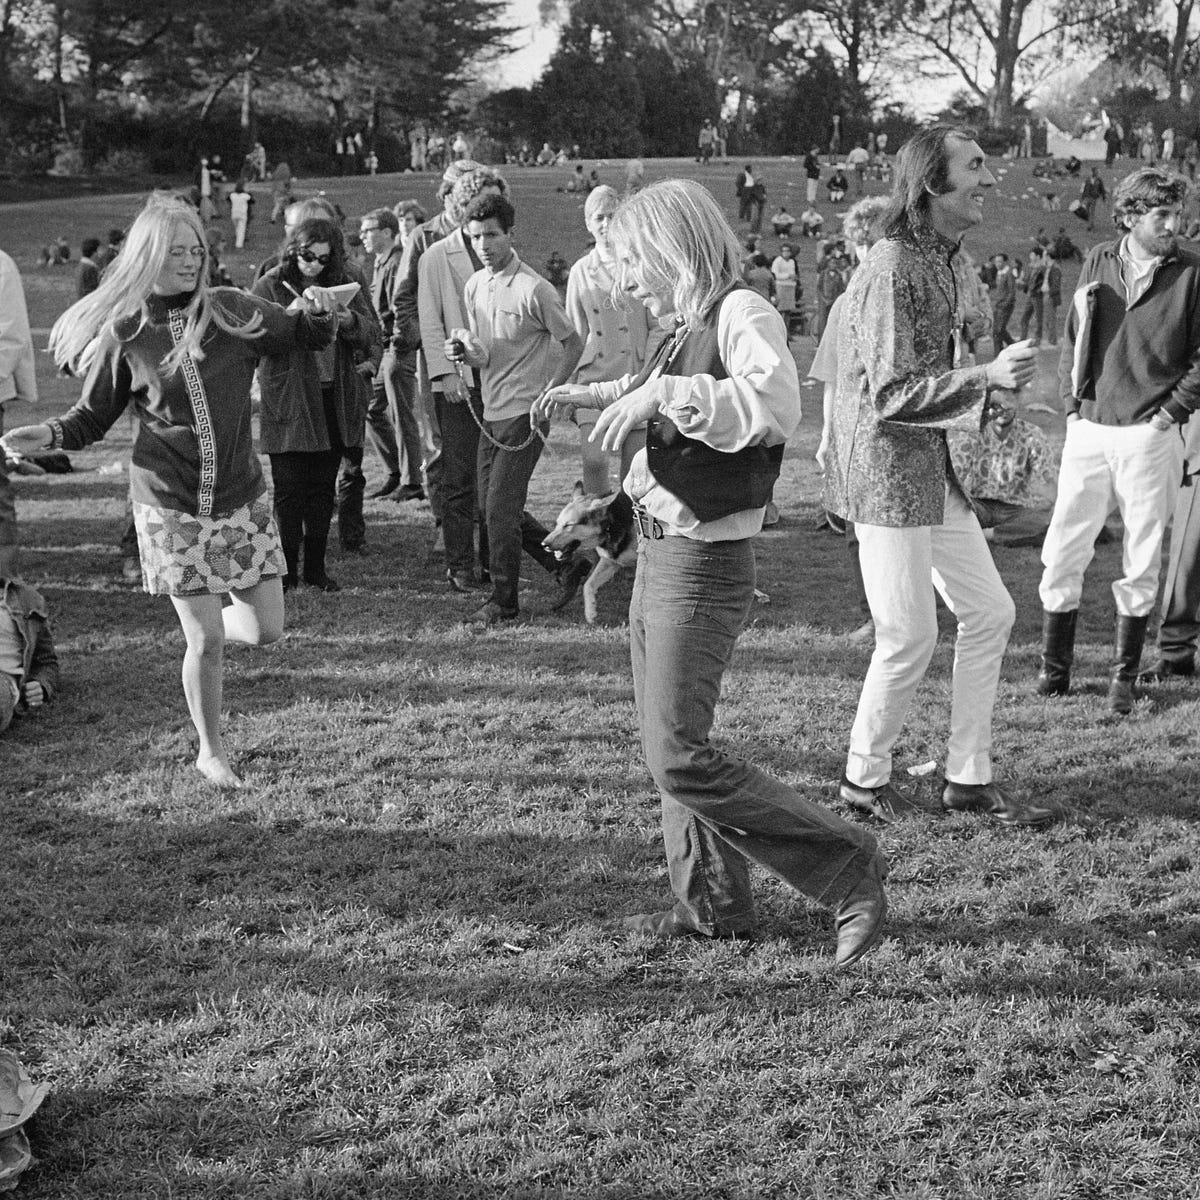 real hippies from the 60s dancing